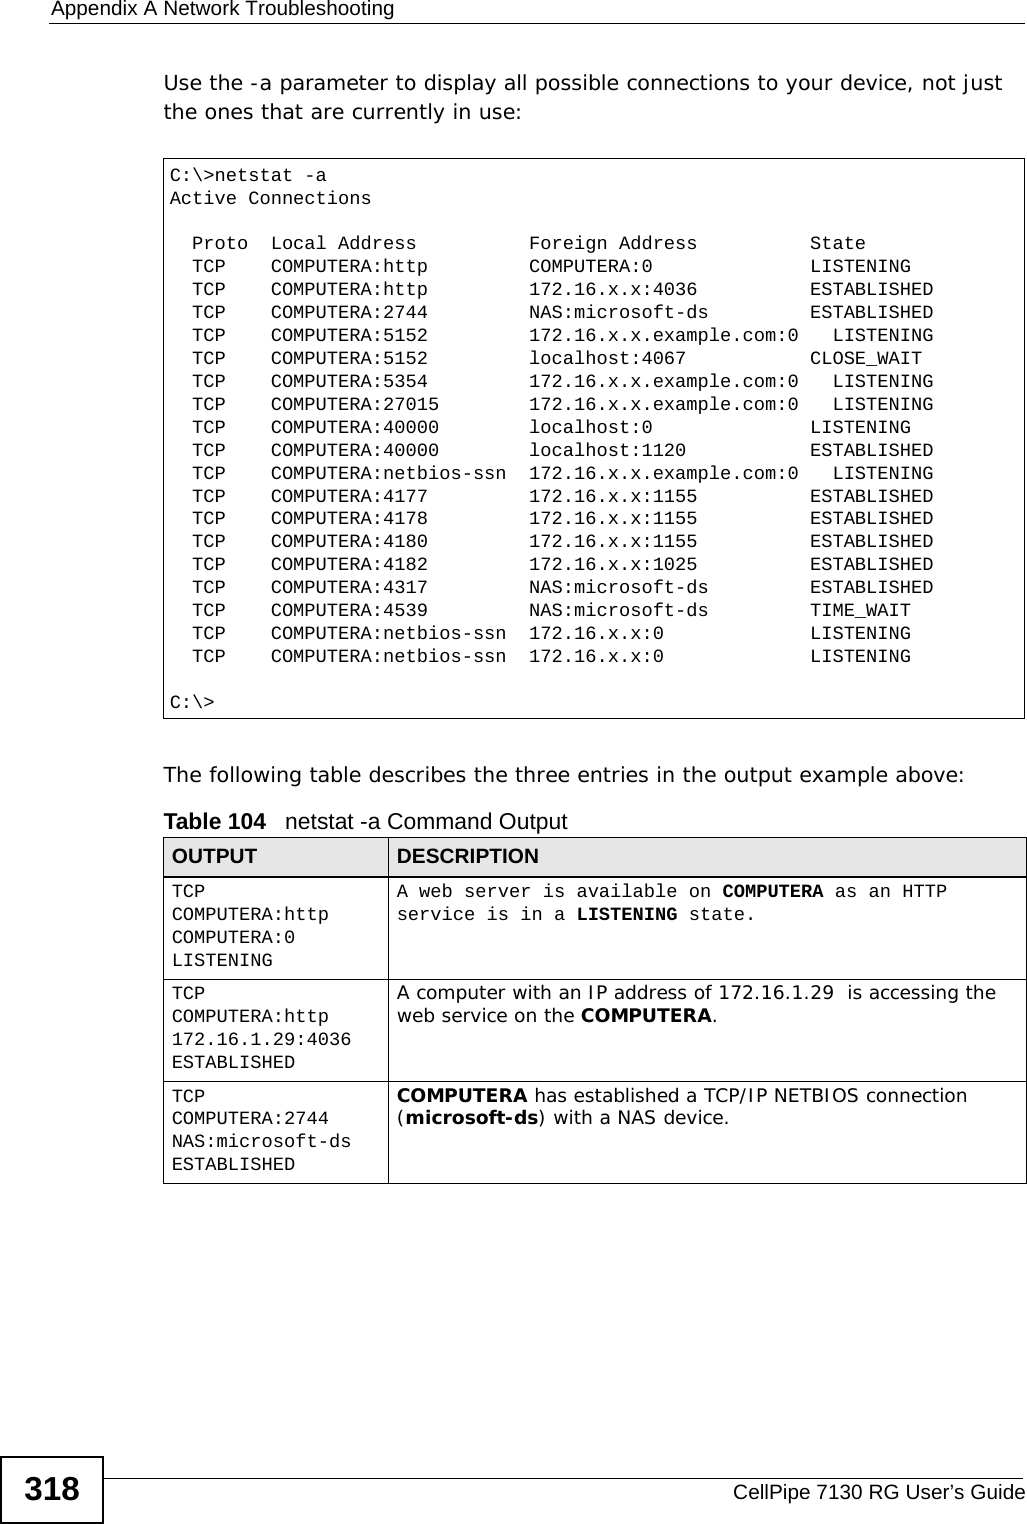 Appendix A Network TroubleshootingCellPipe 7130 RG User’s Guide318Use the -a parameter to display all possible connections to your device, not just the ones that are currently in use: The following table describes the three entries in the output example above:C:\&gt;netstat -aActive Connections  Proto  Local Address          Foreign Address          State  TCP    COMPUTERA:http         COMPUTERA:0              LISTENING  TCP    COMPUTERA:http         172.16.x.x:4036          ESTABLISHED  TCP    COMPUTERA:2744         NAS:microsoft-ds         ESTABLISHED  TCP    COMPUTERA:5152         172.16.x.x.example.com:0   LISTENING  TCP    COMPUTERA:5152         localhost:4067           CLOSE_WAIT  TCP    COMPUTERA:5354         172.16.x.x.example.com:0   LISTENING  TCP    COMPUTERA:27015        172.16.x.x.example.com:0   LISTENING  TCP    COMPUTERA:40000        localhost:0              LISTENING  TCP    COMPUTERA:40000        localhost:1120           ESTABLISHED  TCP    COMPUTERA:netbios-ssn  172.16.x.x.example.com:0   LISTENING  TCP    COMPUTERA:4177         172.16.x.x:1155          ESTABLISHED  TCP    COMPUTERA:4178         172.16.x.x:1155          ESTABLISHED  TCP    COMPUTERA:4180         172.16.x.x:1155          ESTABLISHED  TCP    COMPUTERA:4182         172.16.x.x:1025          ESTABLISHED  TCP    COMPUTERA:4317         NAS:microsoft-ds         ESTABLISHED  TCP    COMPUTERA:4539         NAS:microsoft-ds         TIME_WAIT  TCP    COMPUTERA:netbios-ssn  172.16.x.x:0             LISTENING  TCP    COMPUTERA:netbios-ssn  172.16.x.x:0             LISTENING  C:\&gt;Table 104   netstat -a Command OutputOUTPUT DESCRIPTIONTCP     COMPUTERA:http        COMPUTERA:0            LISTENINGA web server is available on COMPUTERA as an HTTP service is in a LISTENING state.TCP     COMPUTERA:http        172.16.1.29:4036       ESTABLISHEDA computer with an IP address of 172.16.1.29  is accessing the web service on the COMPUTERA.TCP     COMPUTERA:2744        NAS:microsoft-ds       ESTABLISHEDCOMPUTERA has established a TCP/IP NETBIOS connection (microsoft-ds) with a NAS device.